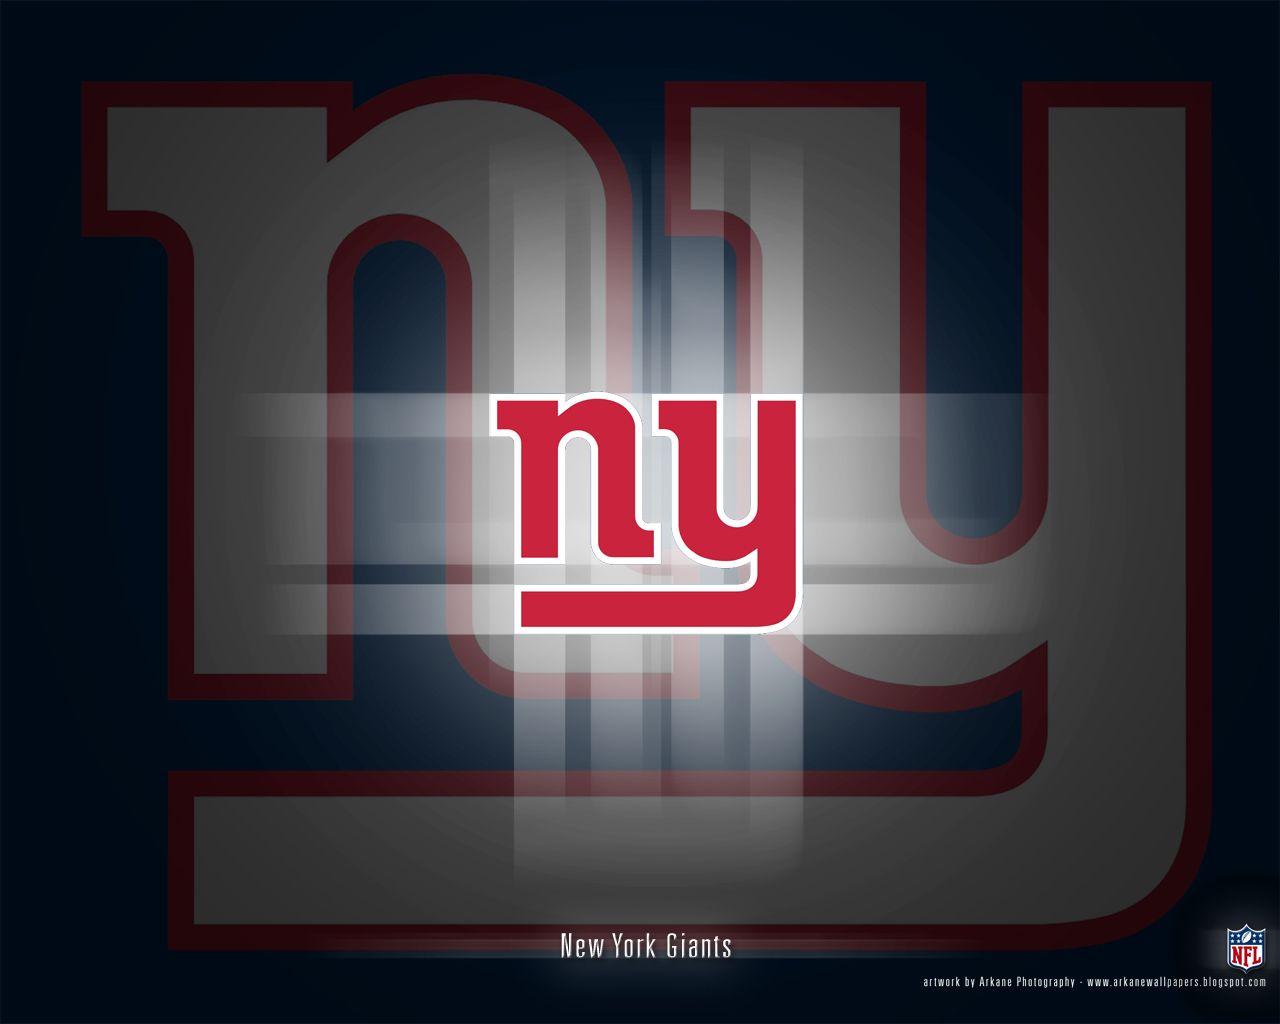 New York Giants Wallpaper (Picture)